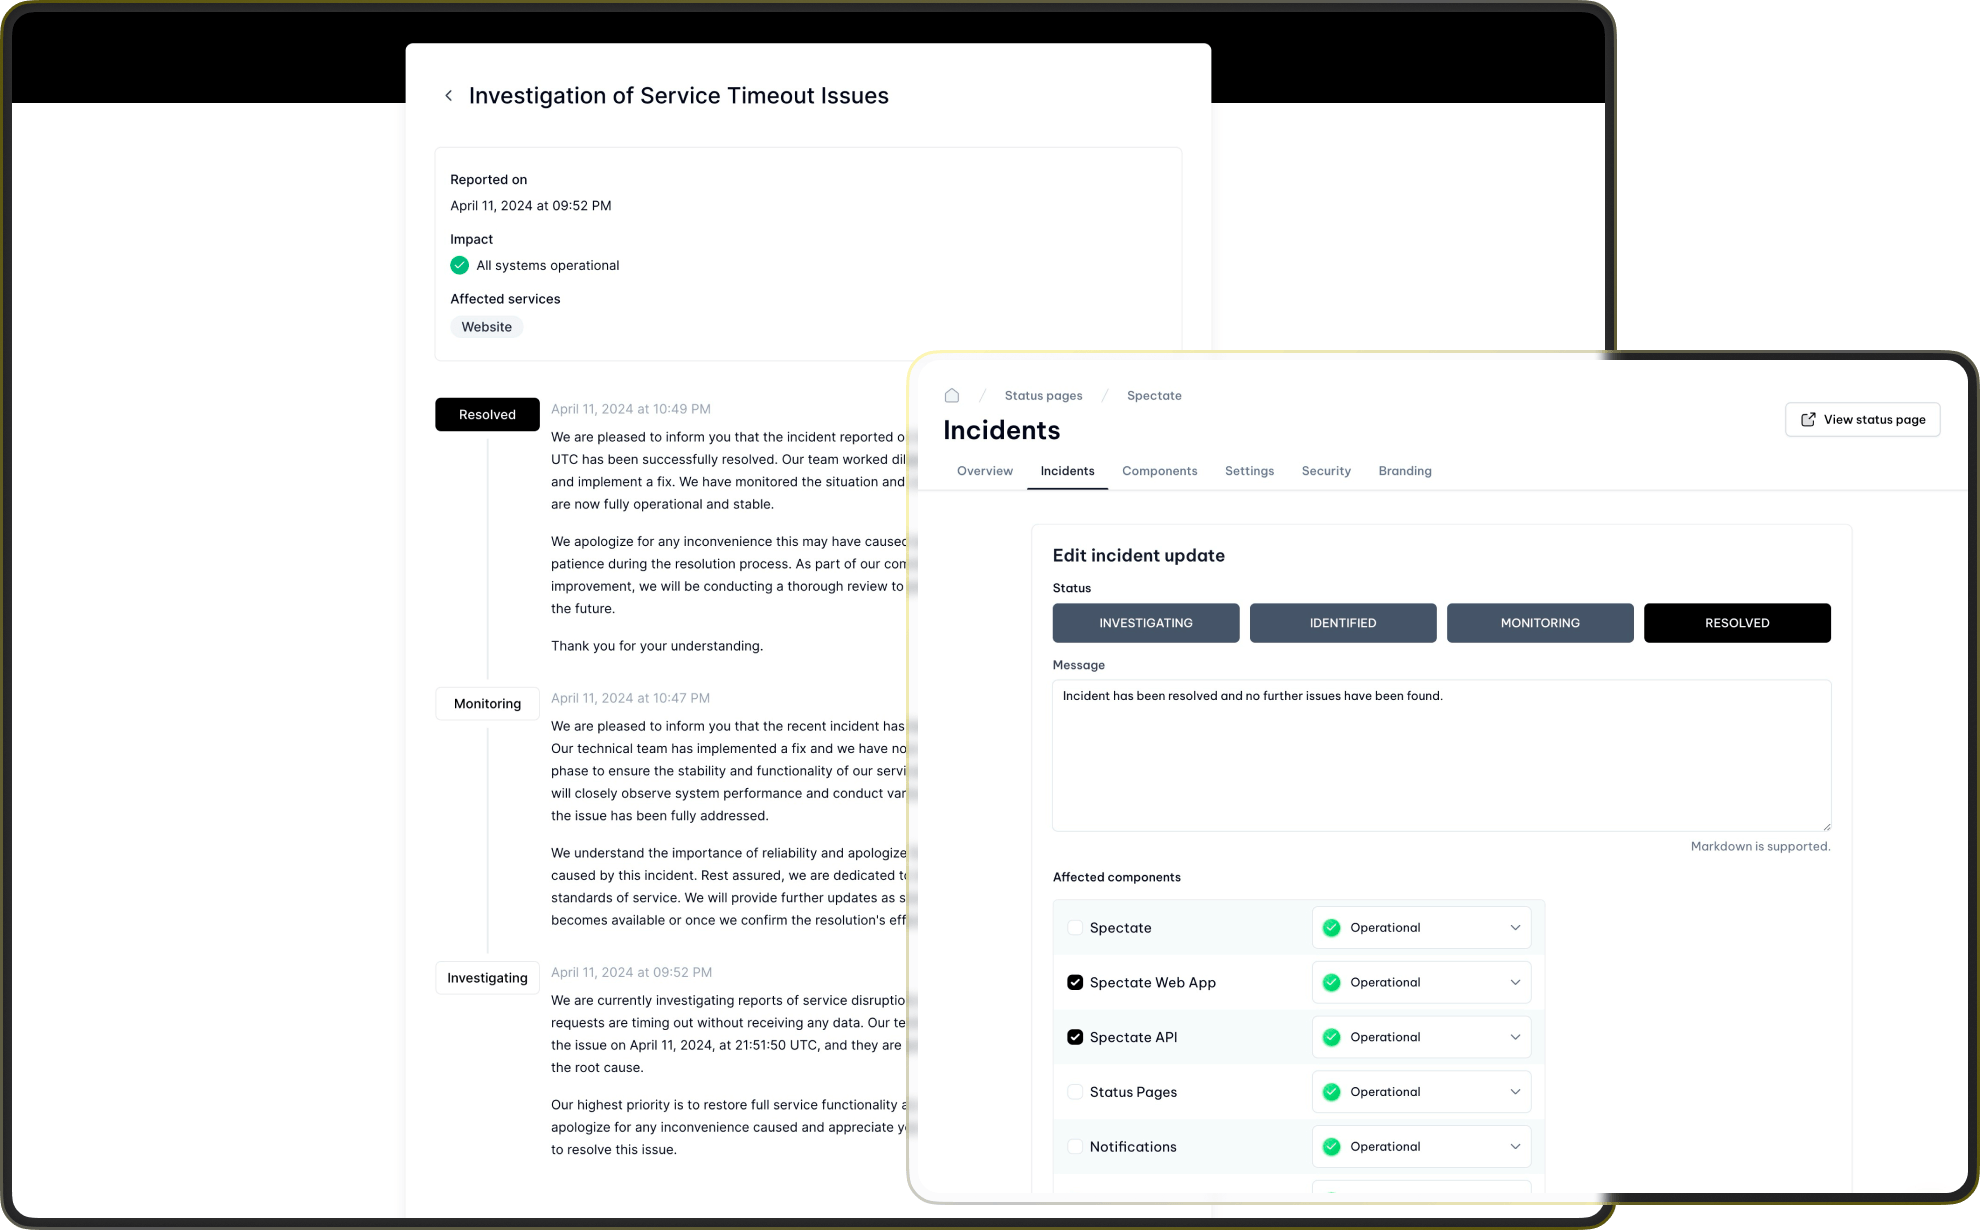 AI-powered status pages